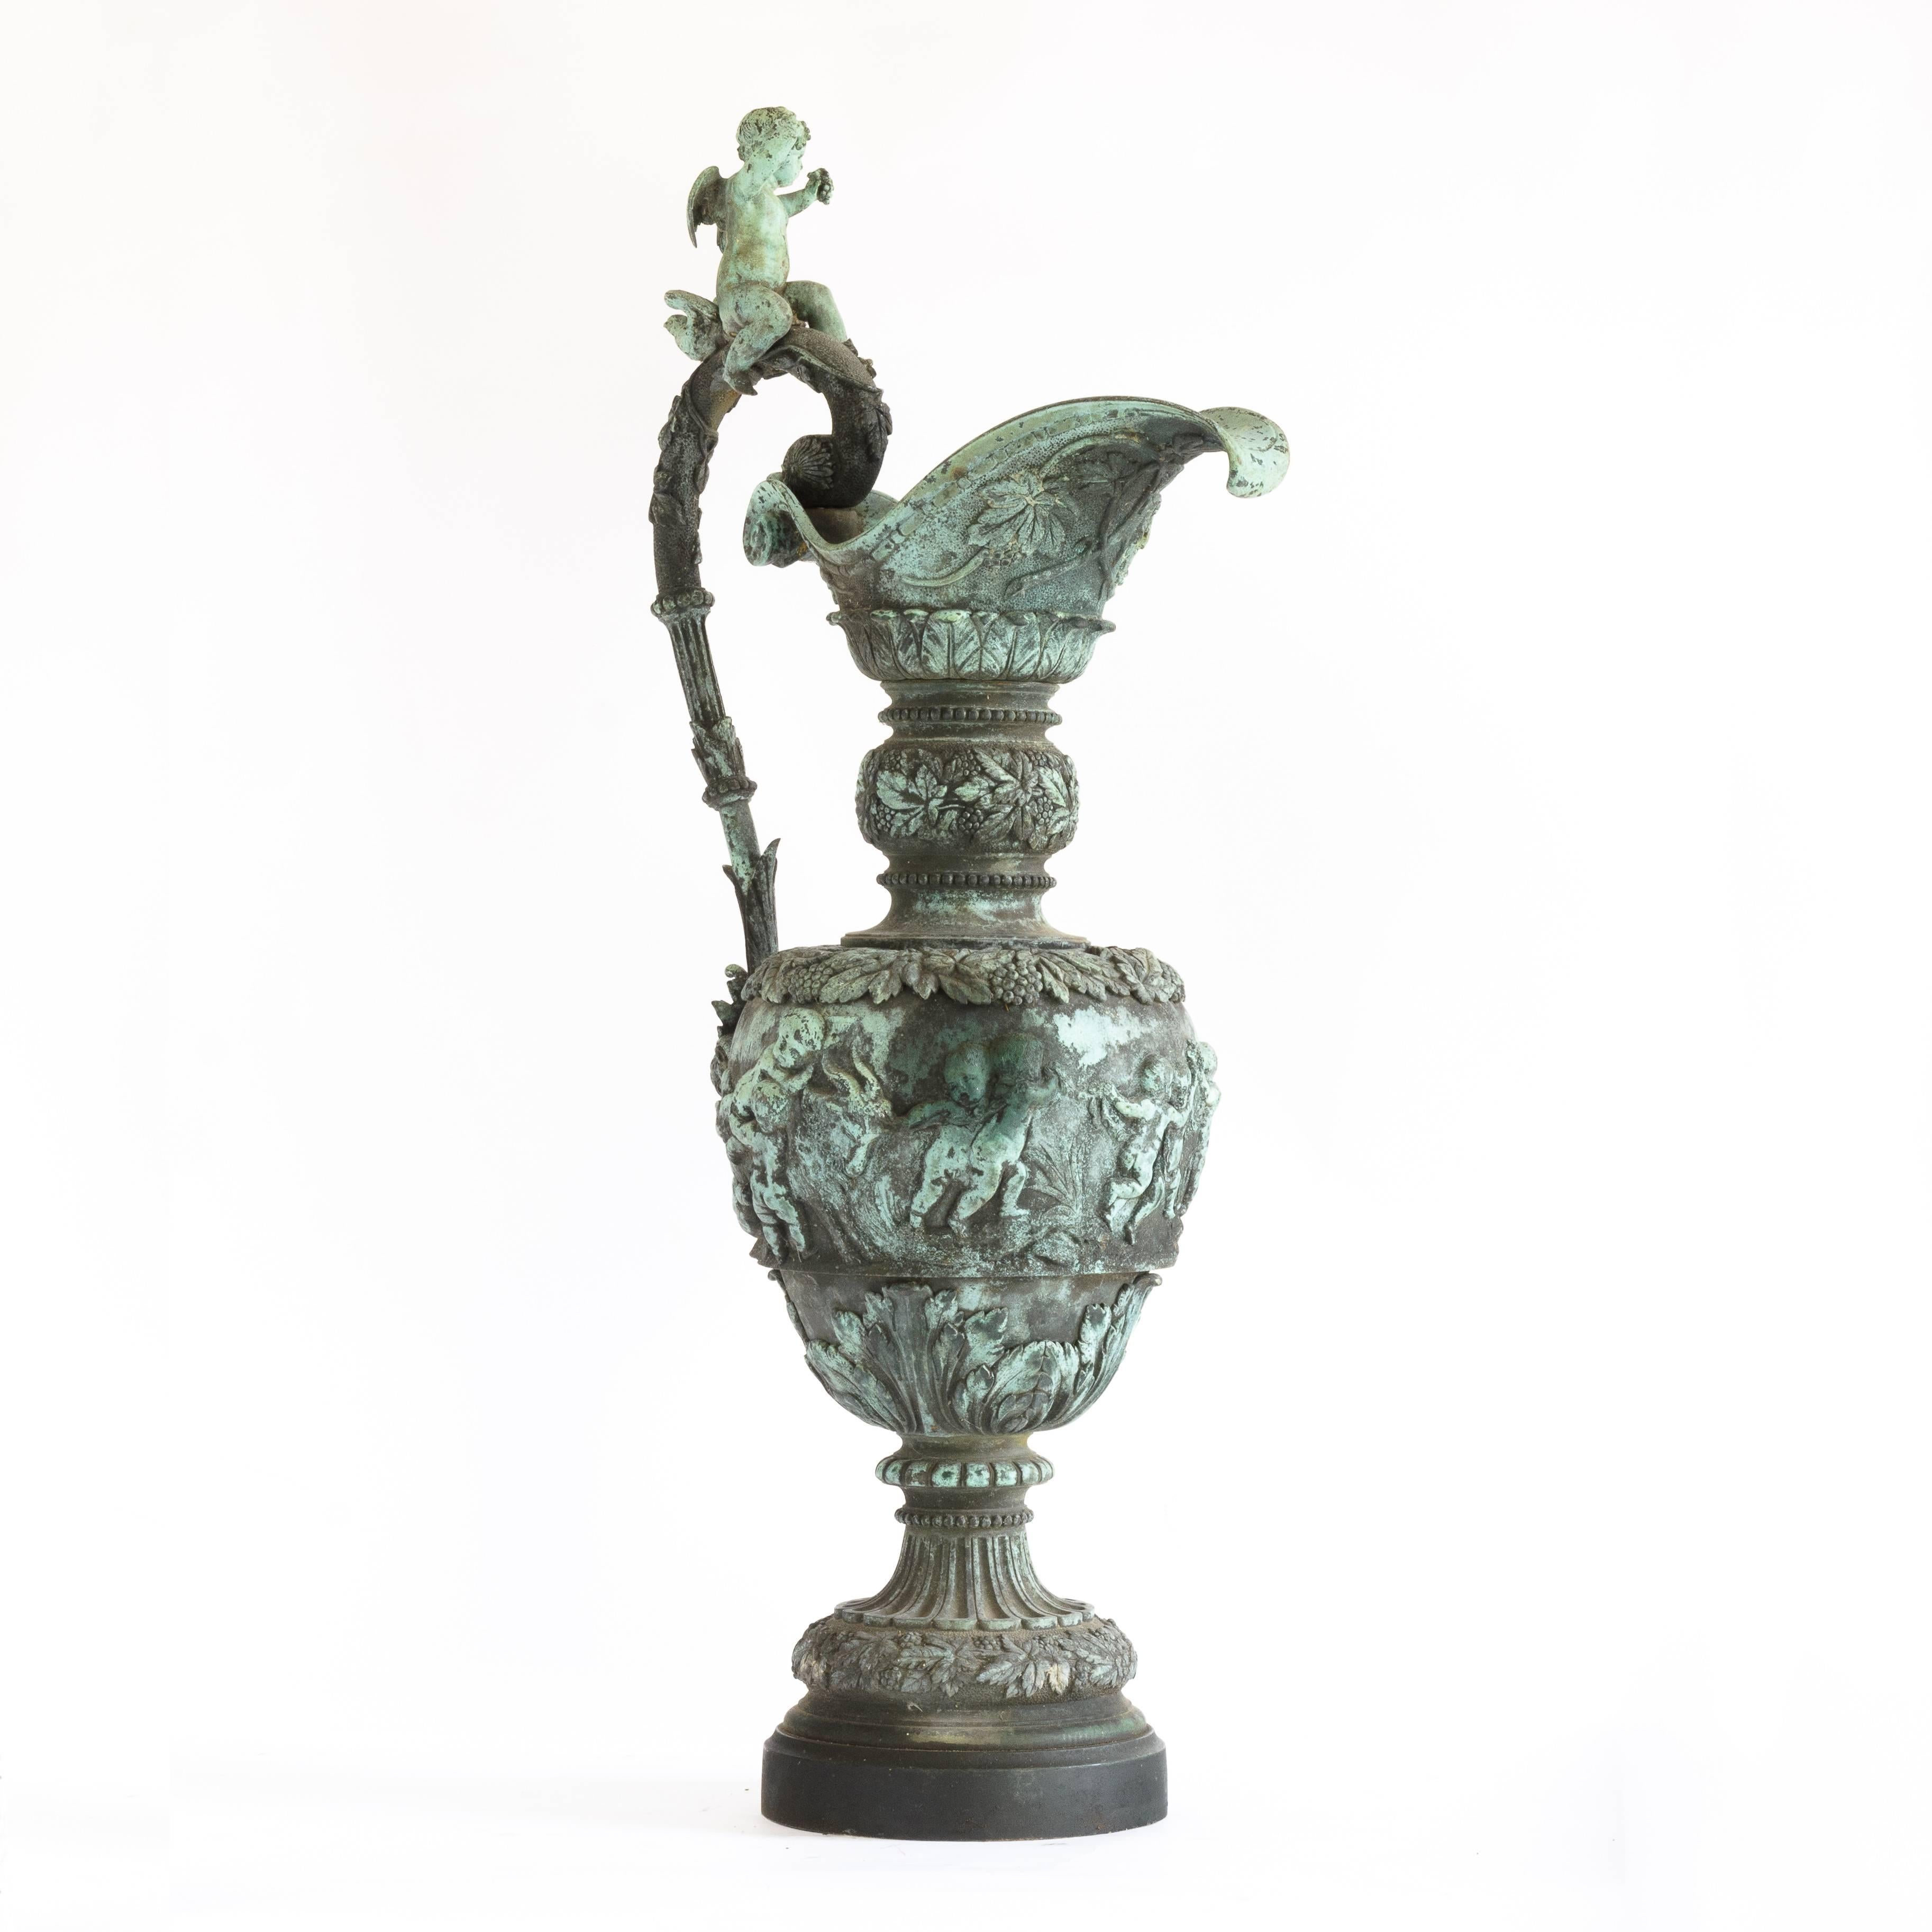 Cast Exceptional French Bronze Ewer Attributed to Villemsens of Paris